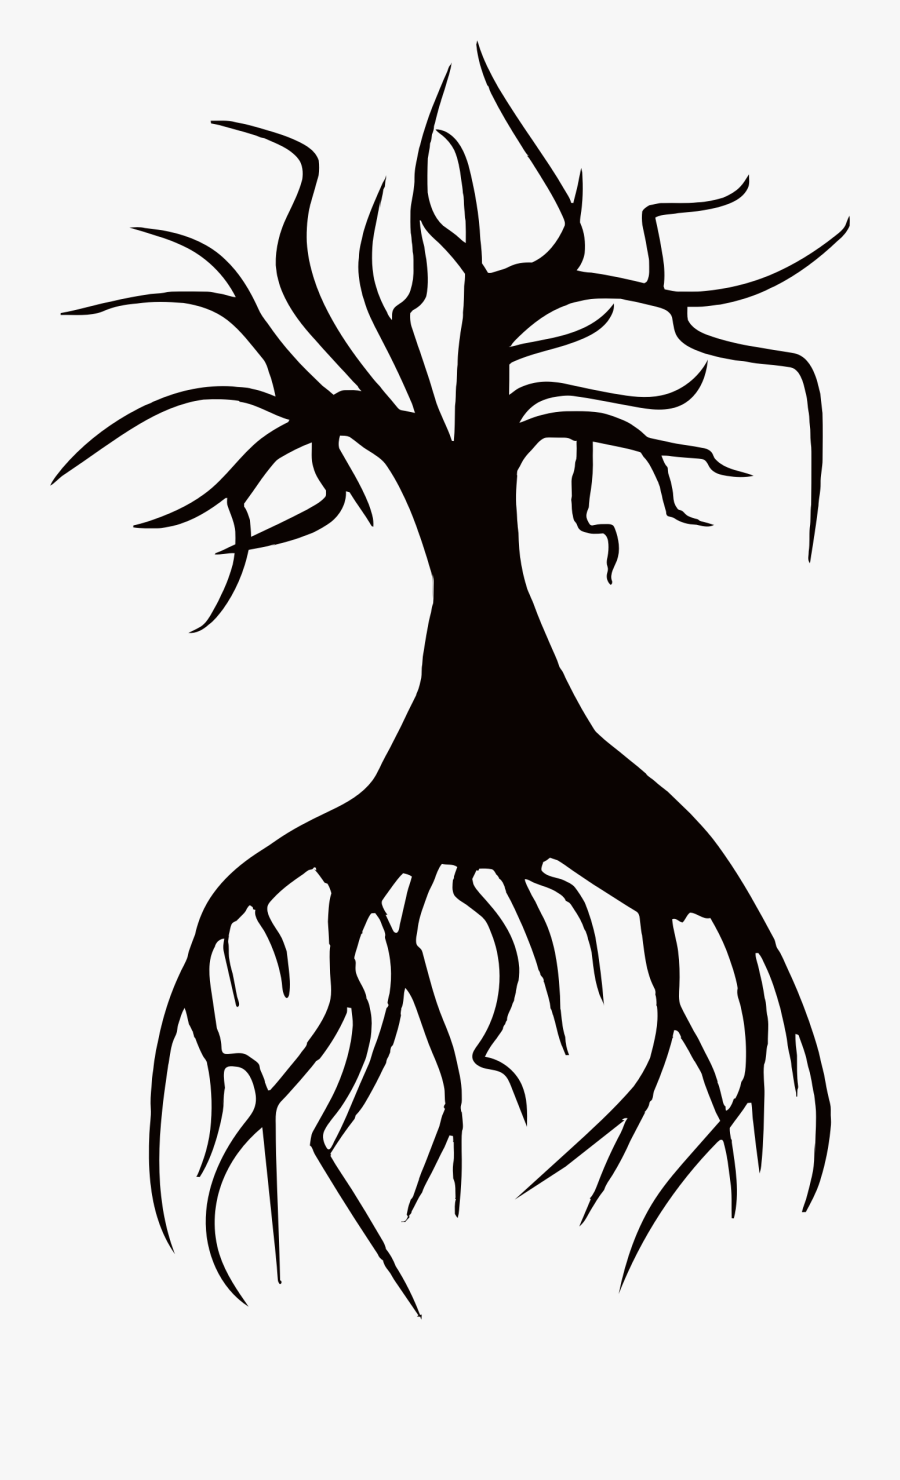 Transparent Tree Roots Silhouette Png - Dying Tree With Roots, Transparent Clipart